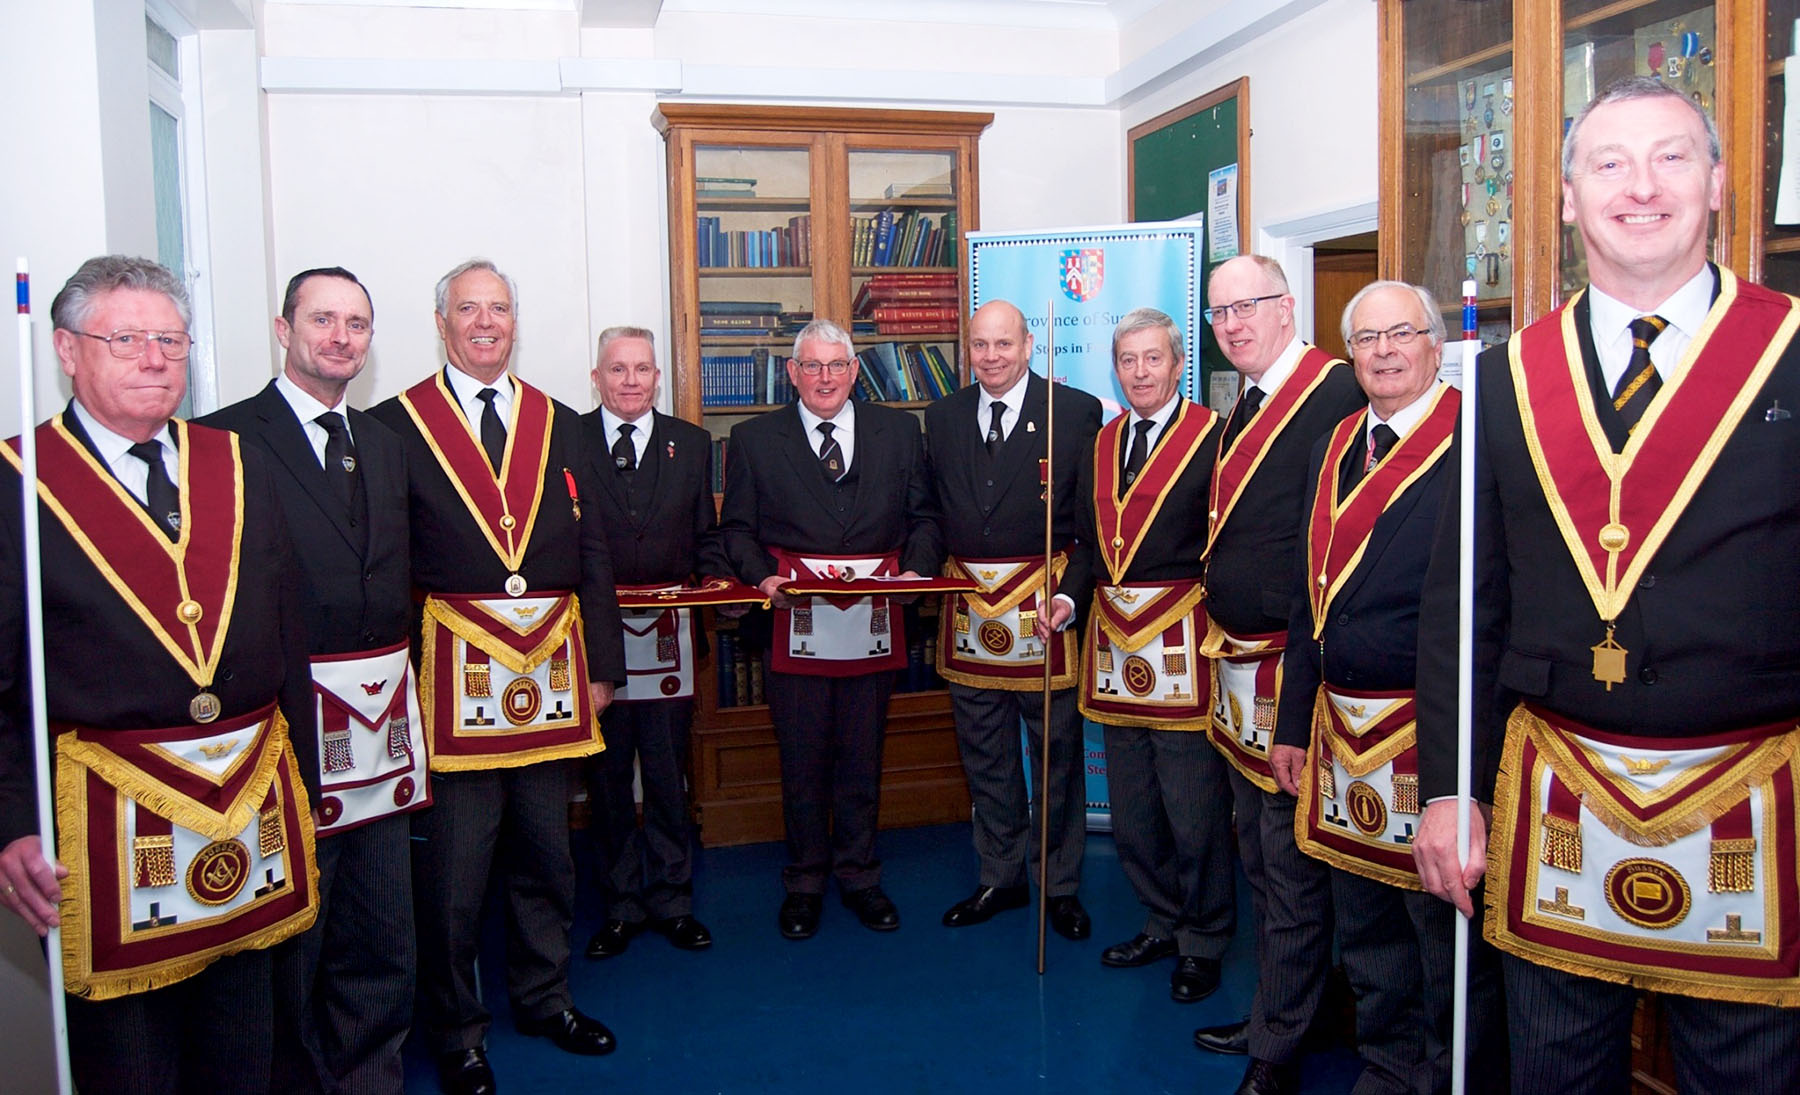 The Annual Meeting of Provincial Grand Court on Saturday 6th April 2019